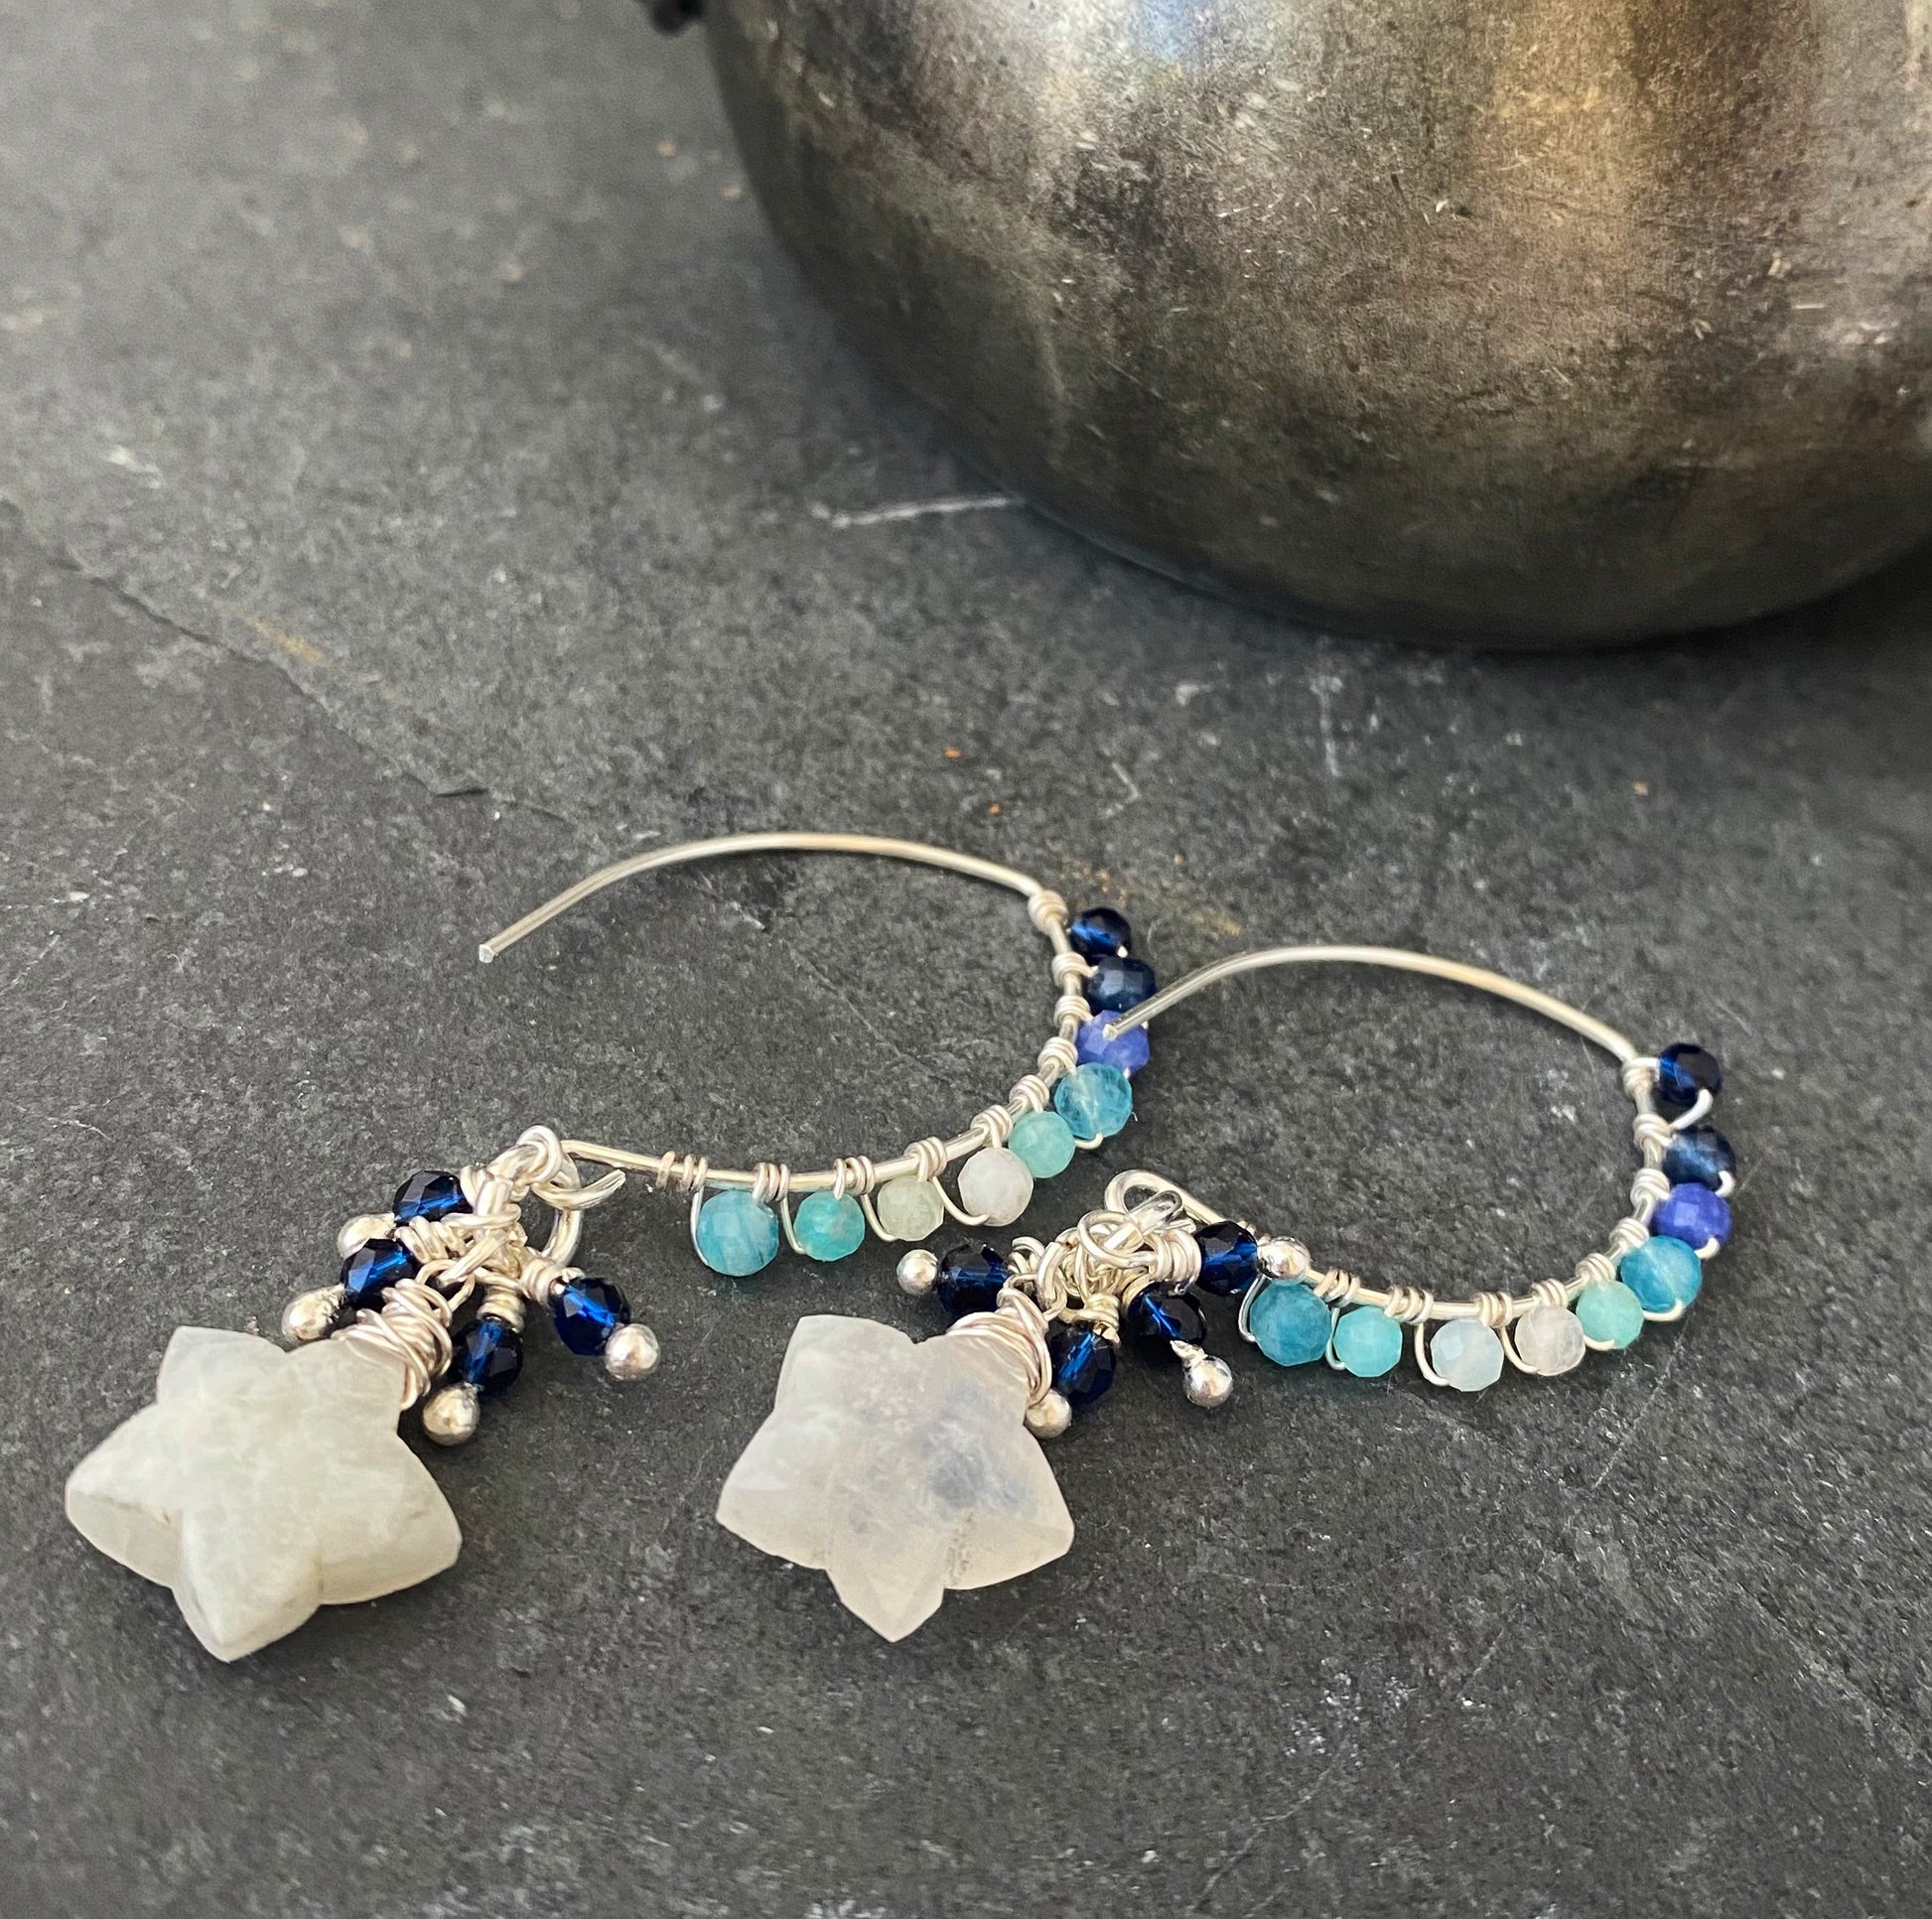 Moonstone Stars. Moonstone and mixed blue stones and silver metal earrings - Andria Bieber Designs 